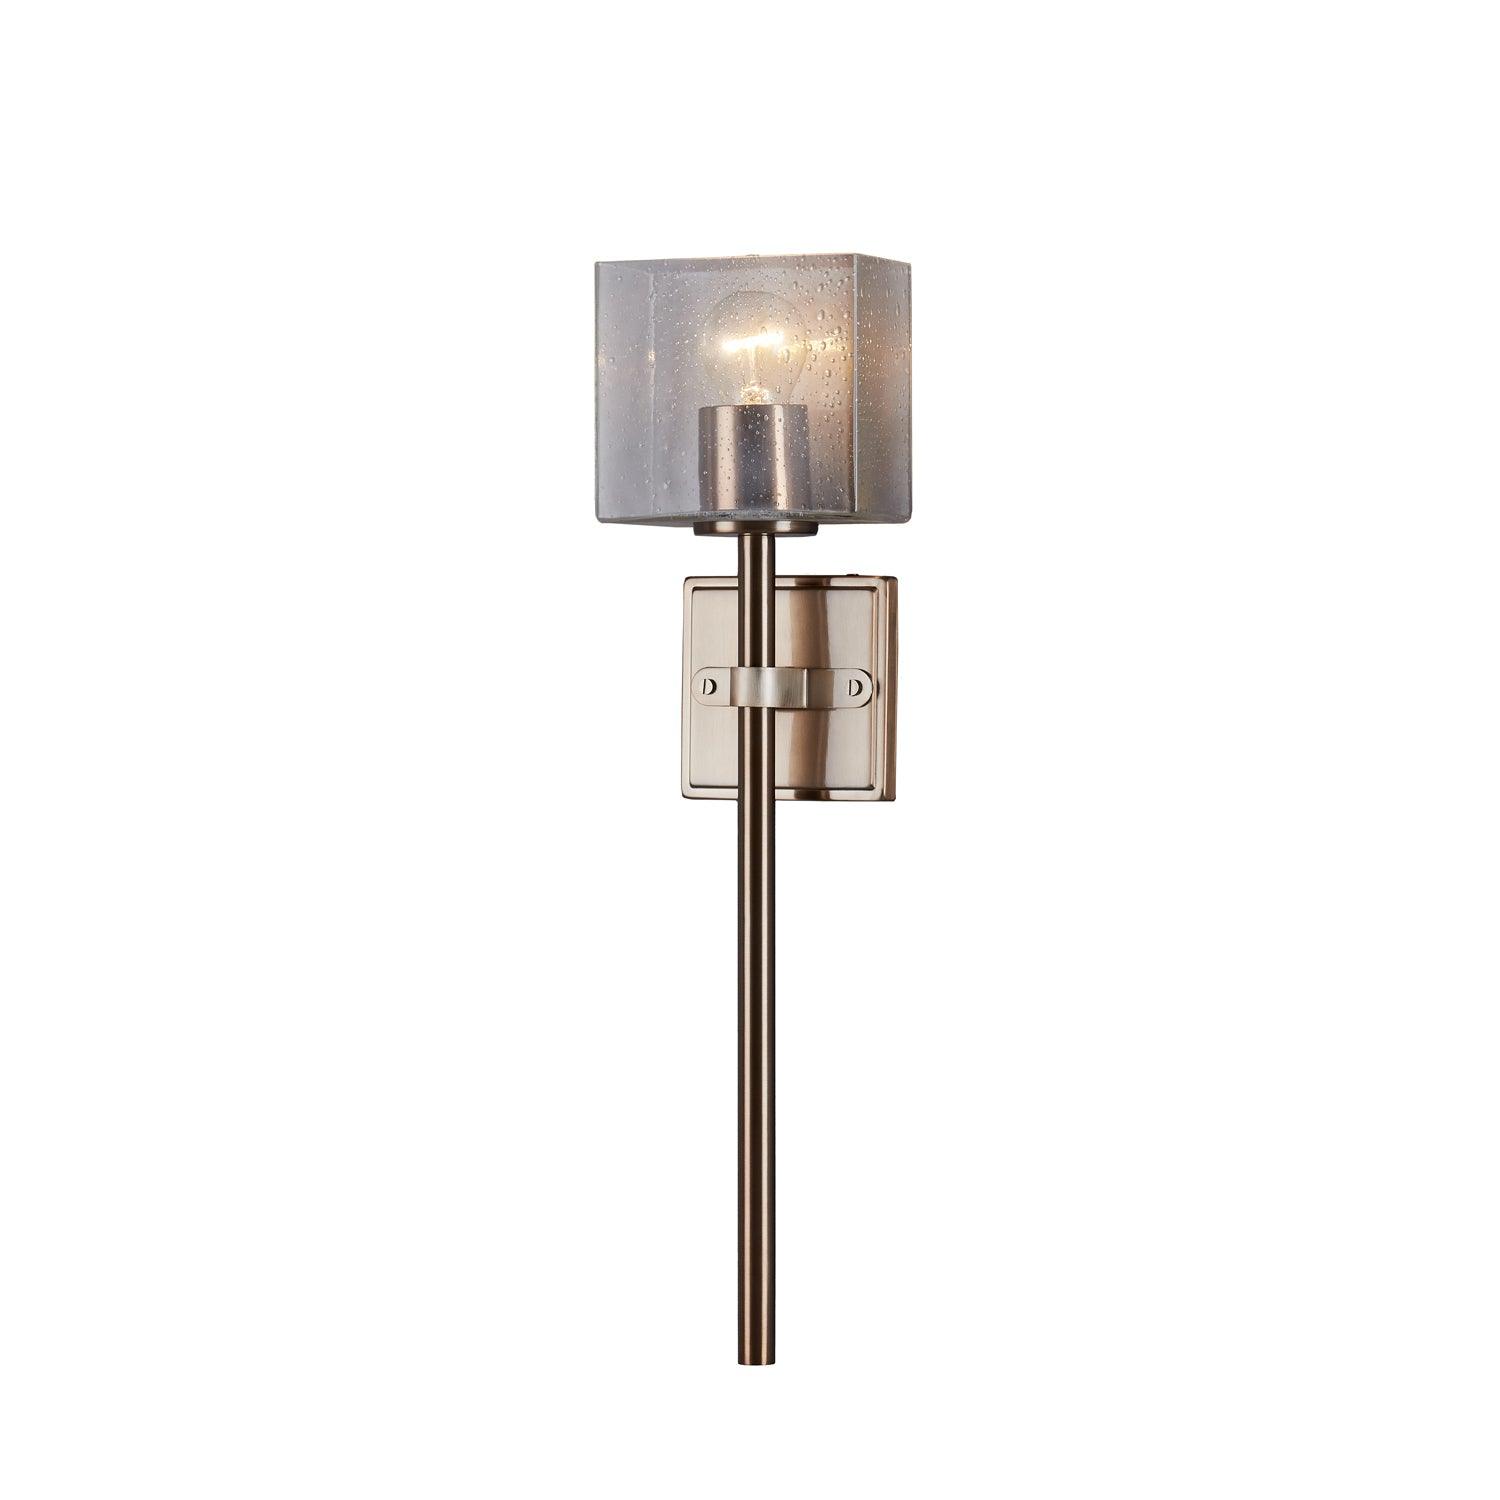 Justice Designs - Spruce Wall Sconce - FSN-4391-SEED-BRSS | Montreal Lighting & Hardware